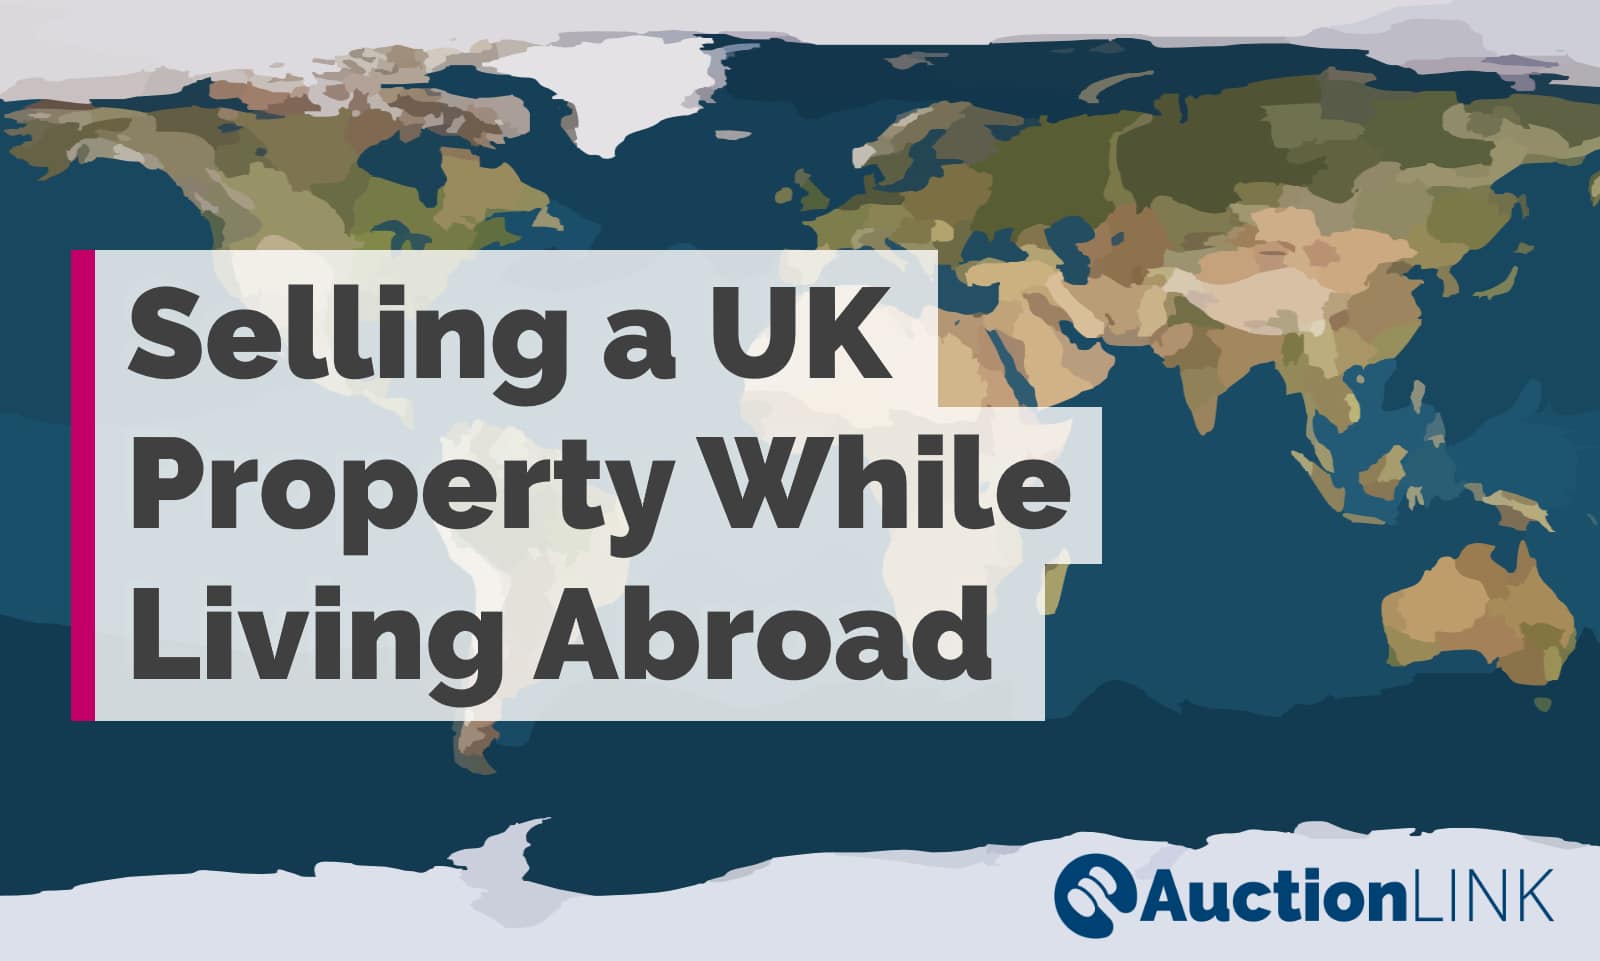 Selling a UK Property While Living Abroad